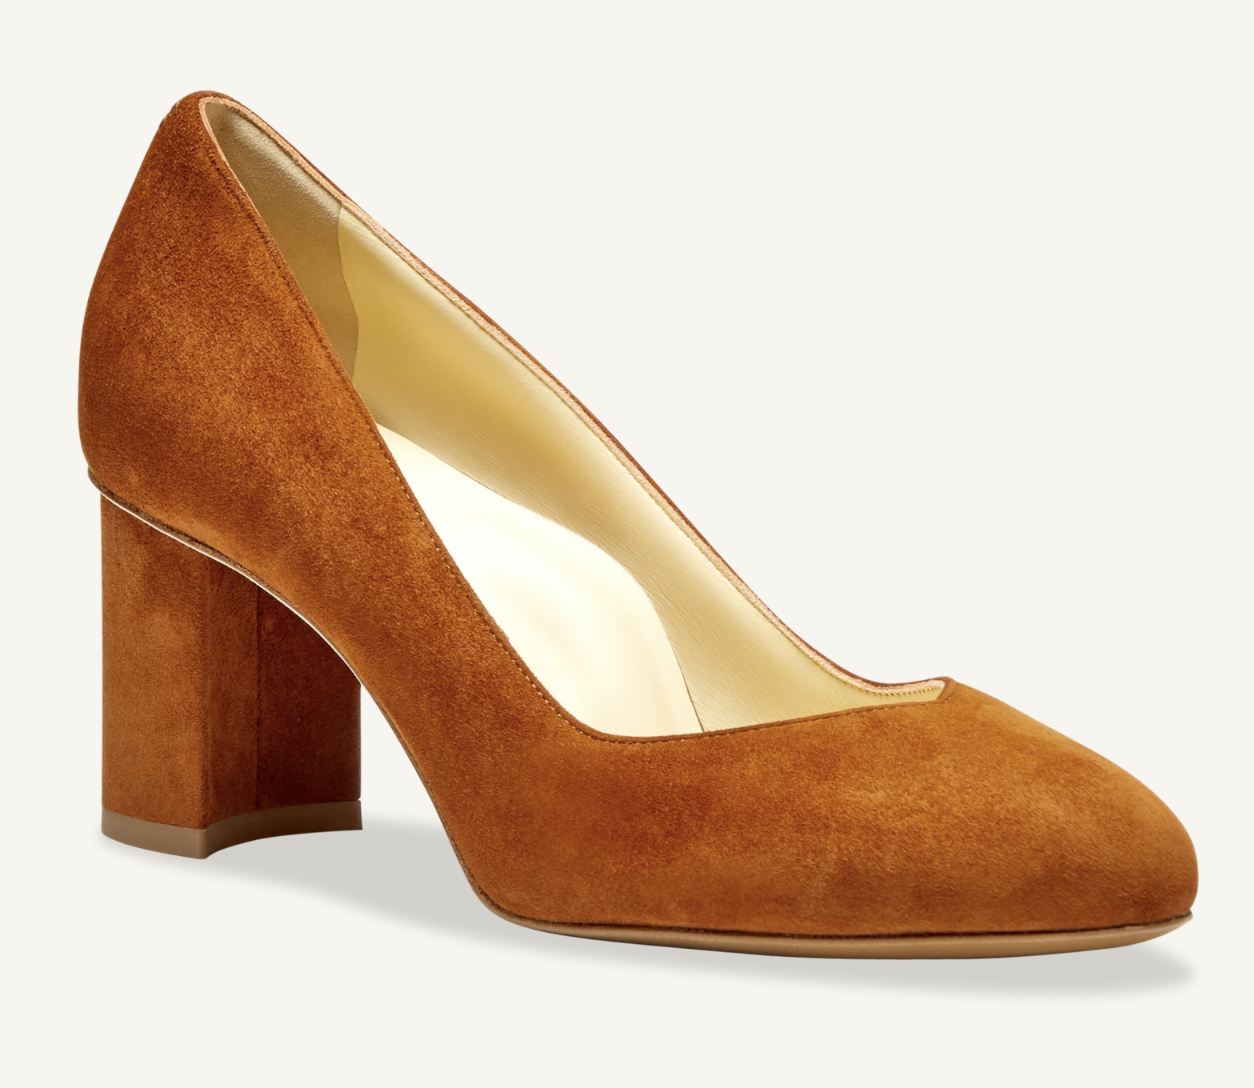 11 Most Comfortable Heels for 2021 - Best Heeled Shoes for Work